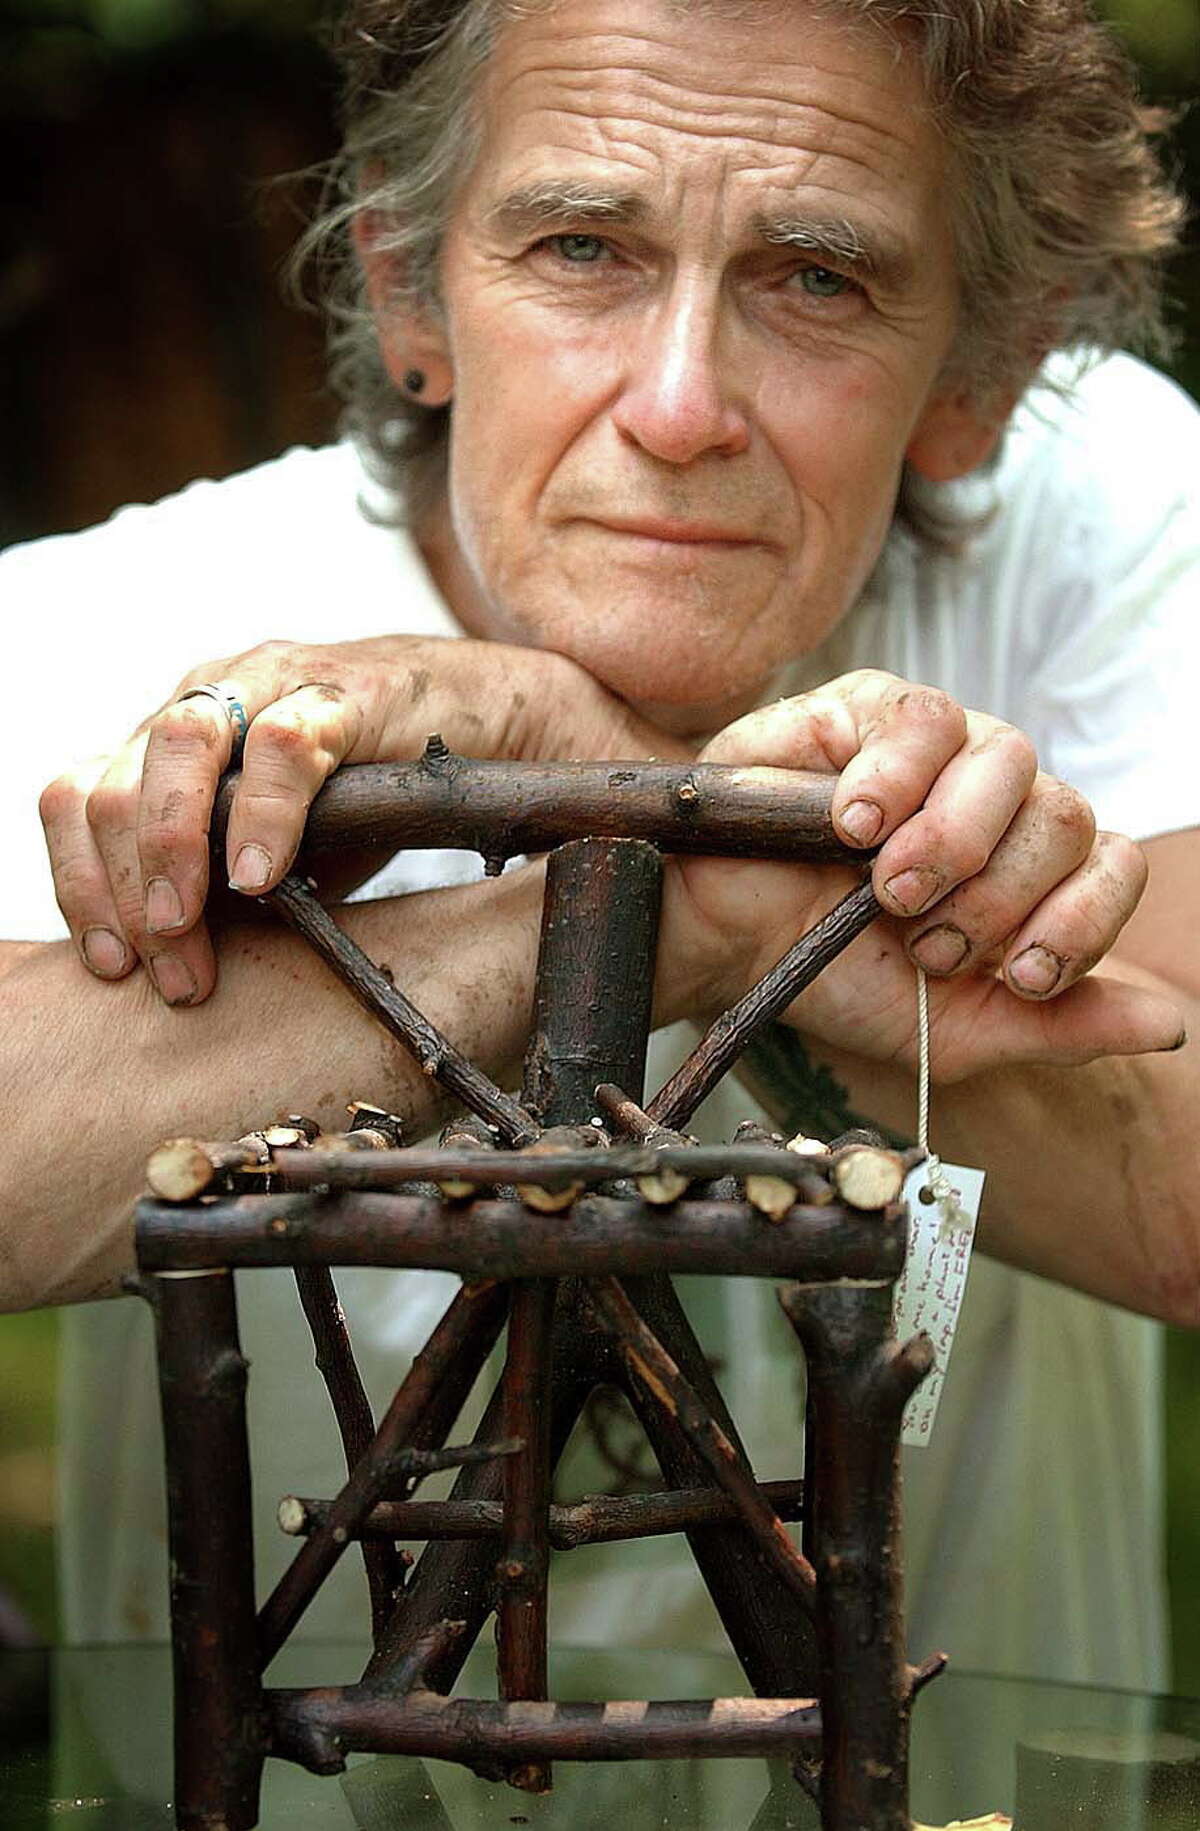 Paul Weinman and one of his miniature chairs that he made, Monday, June 27, 2005, in Albany, N.Y. (Steve Jacobs/Times Union)